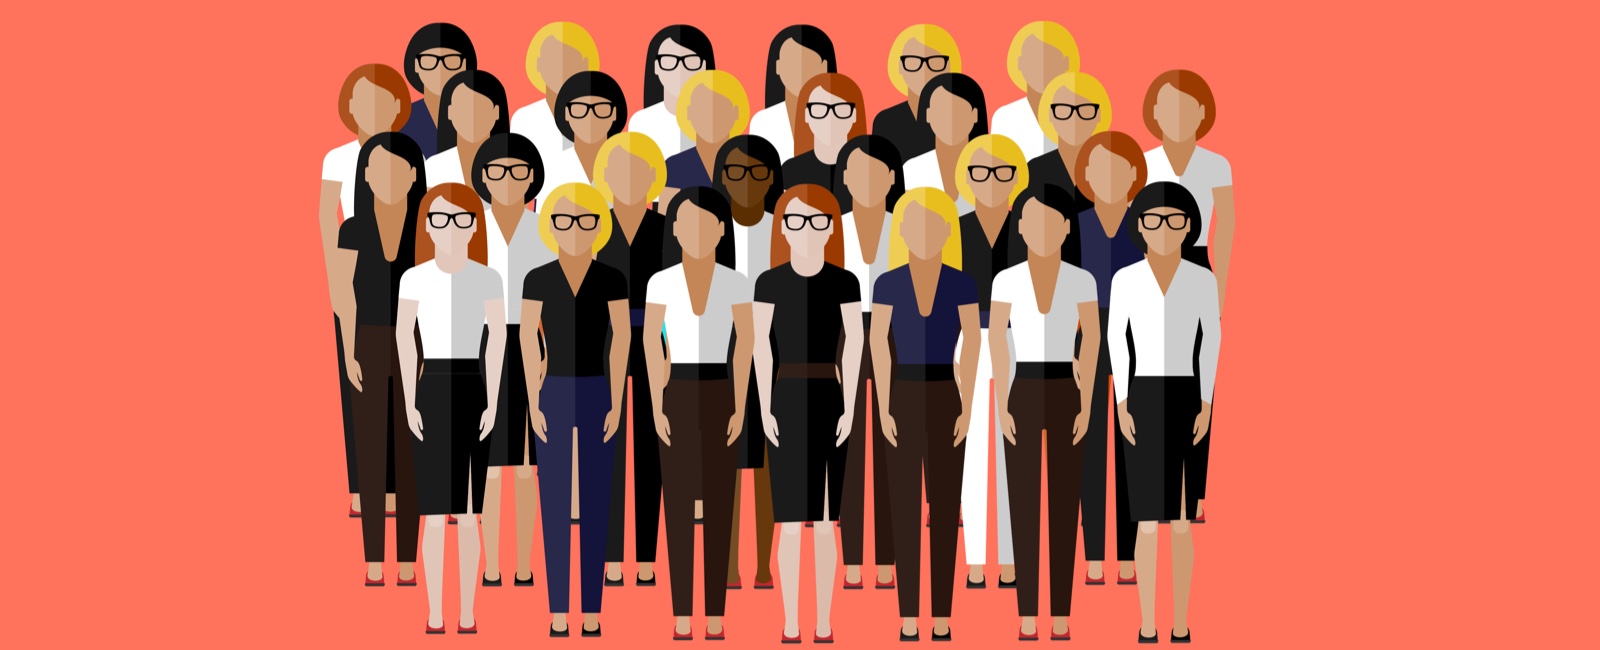 Women Building a Community in IT at the University of California